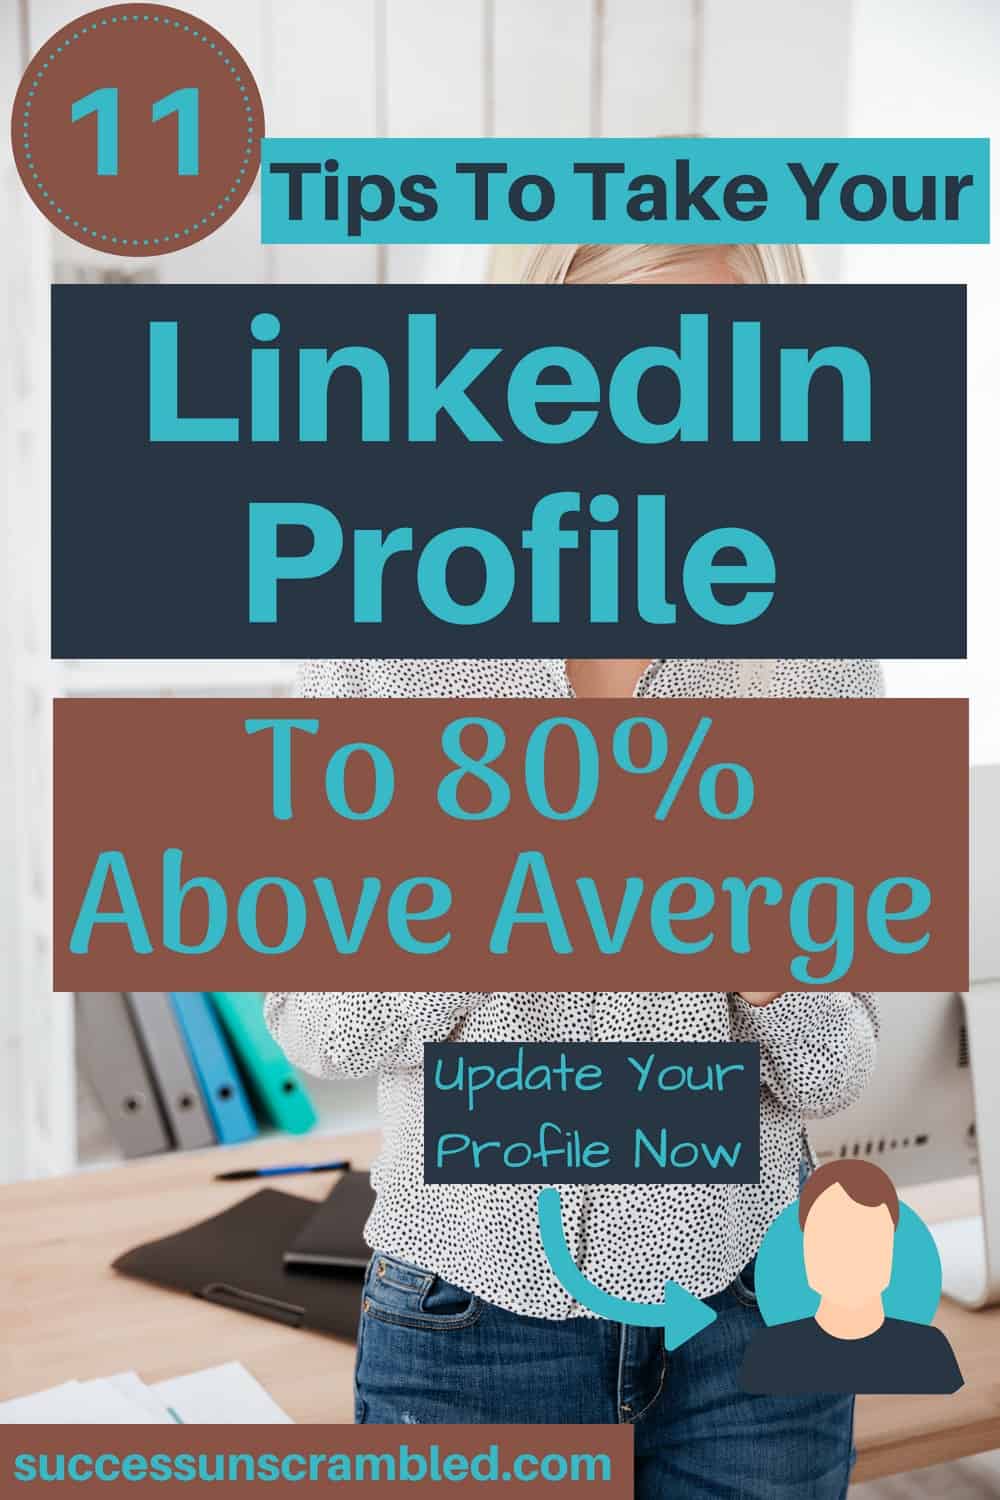 11 Tips To Take Your LinkedIn Profile To 80% Above Average